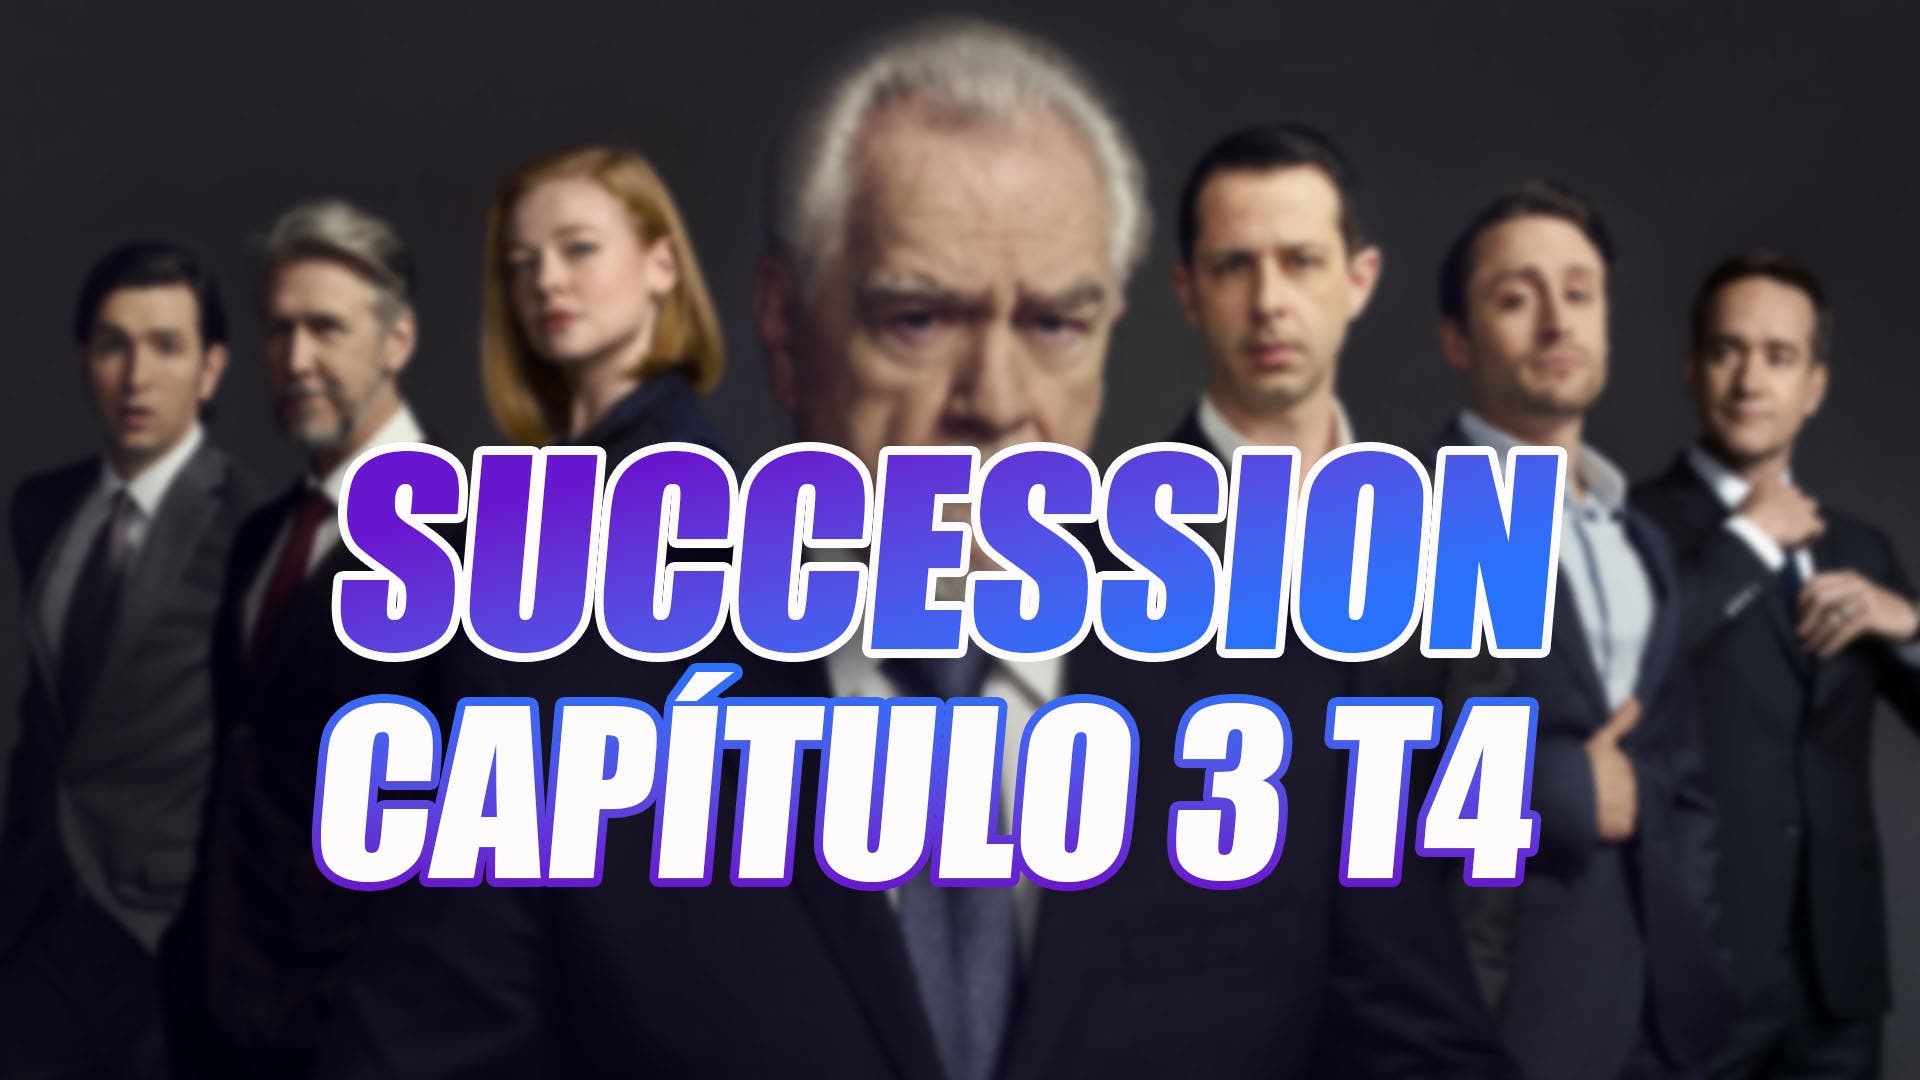 Date and time of Succession Chapter 3 (Season 4)